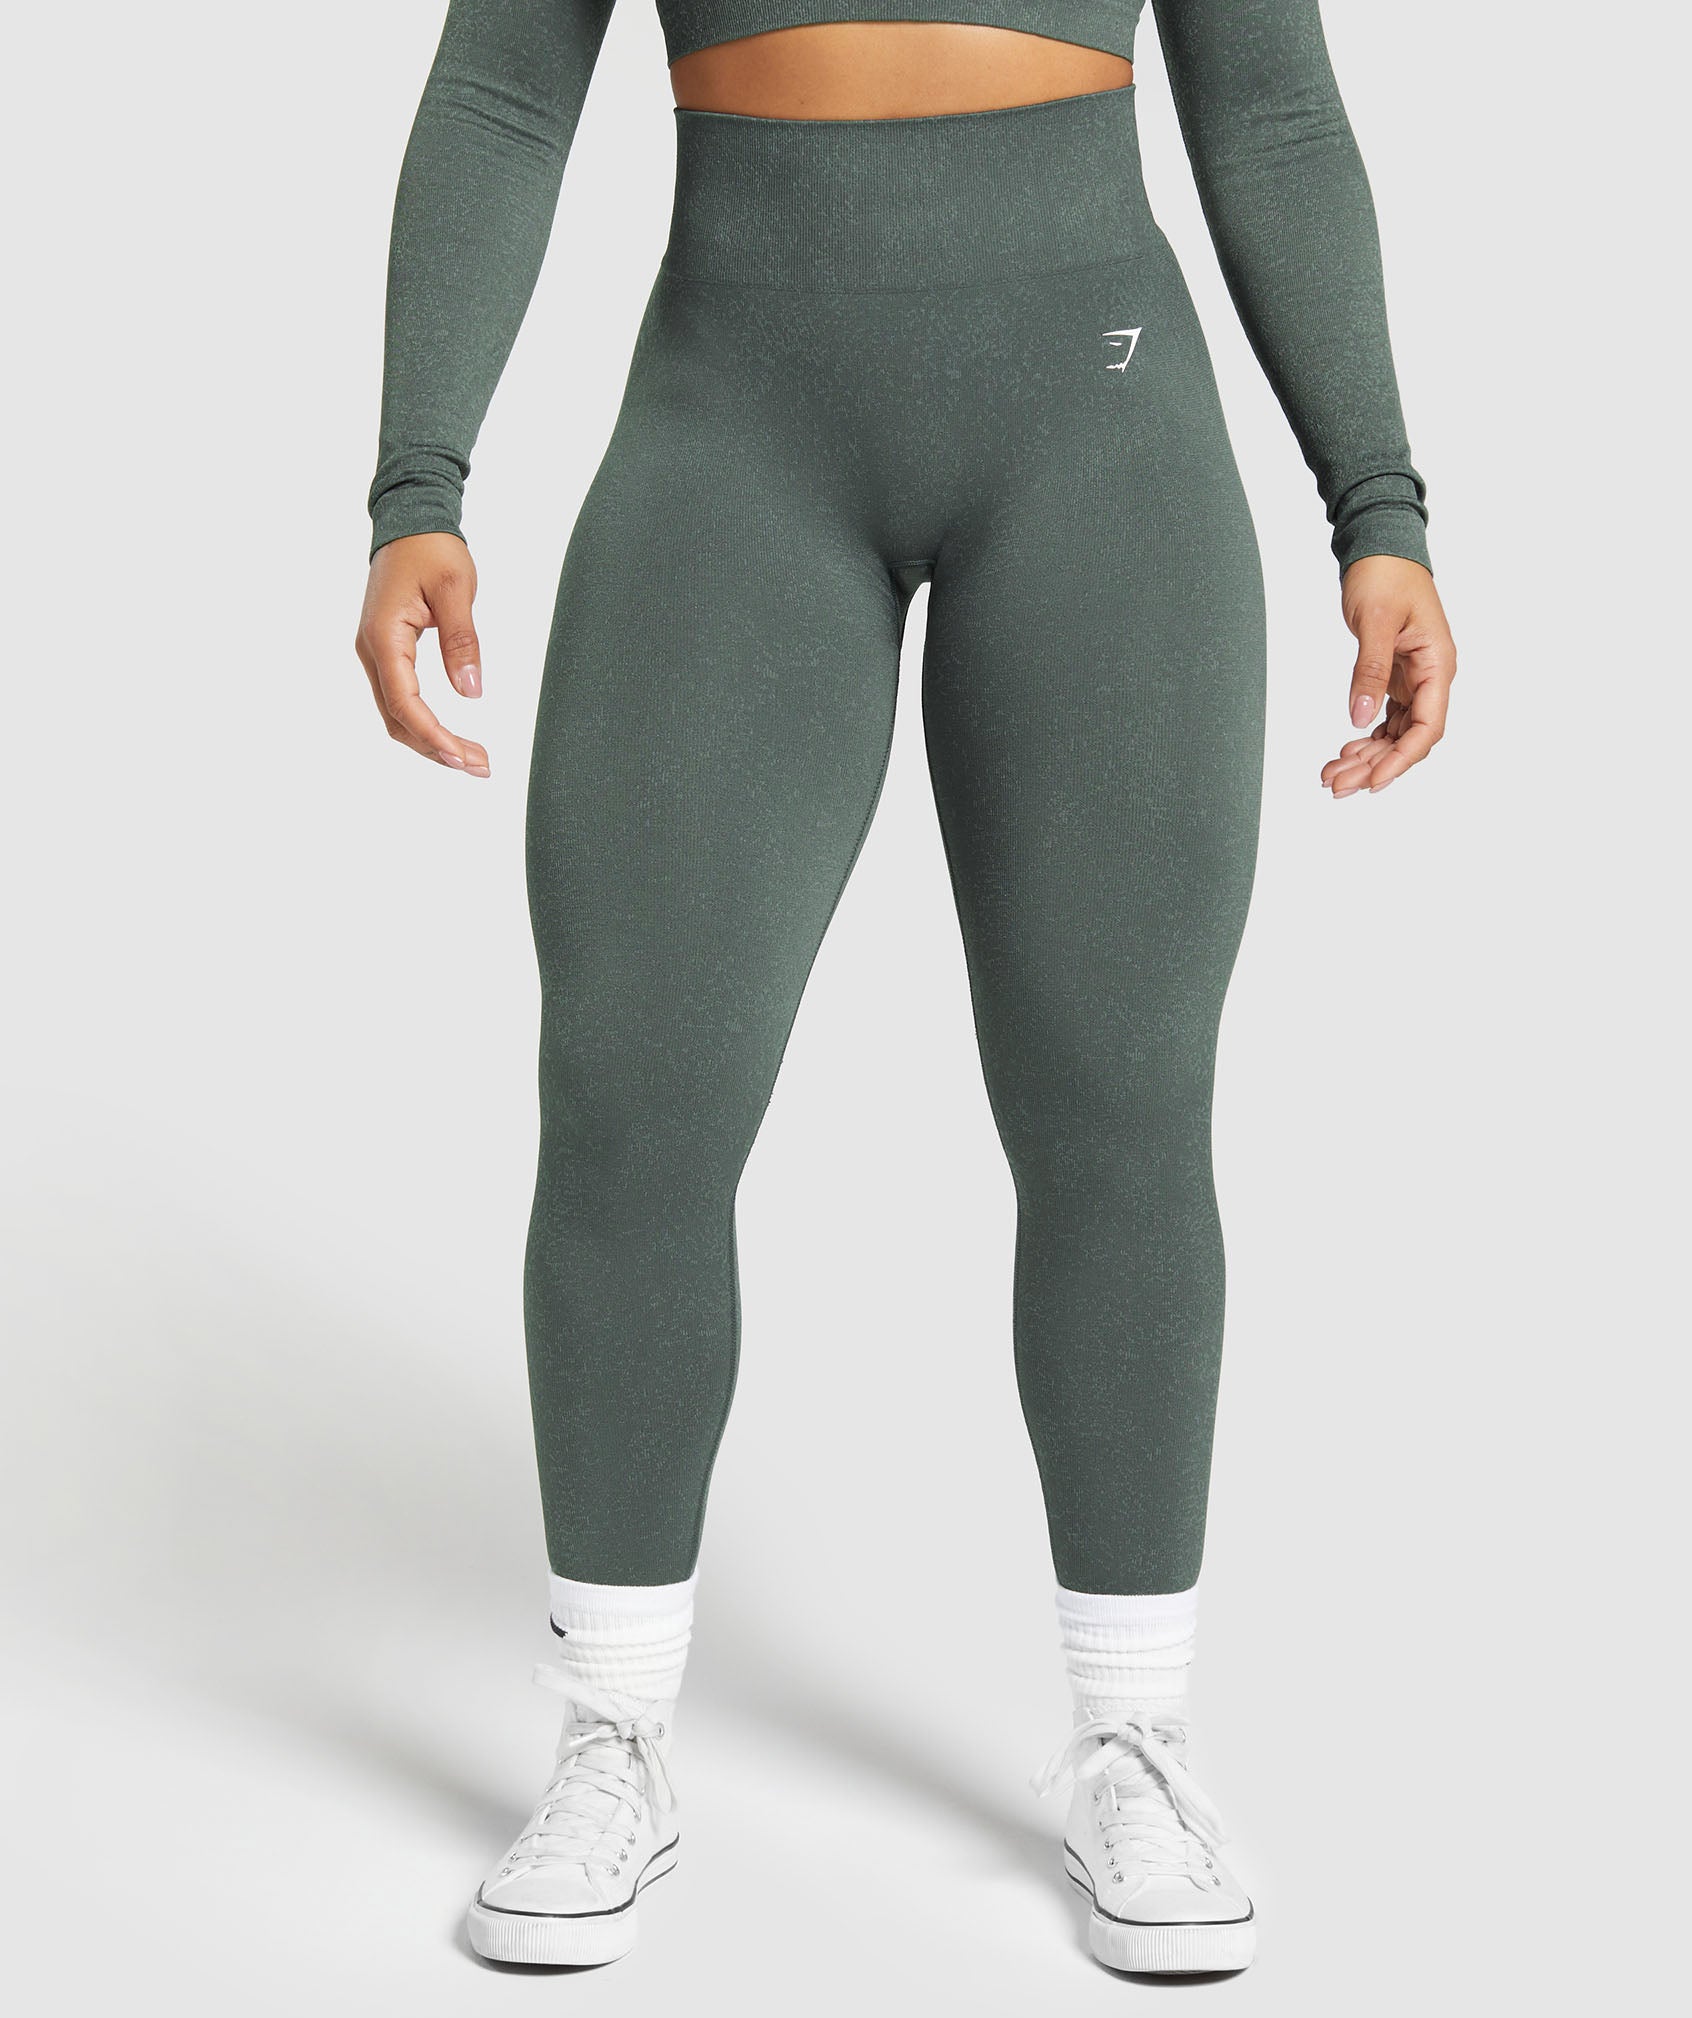 Adapt Fleck Seamless Leggings in {{variantColor} is out of stock